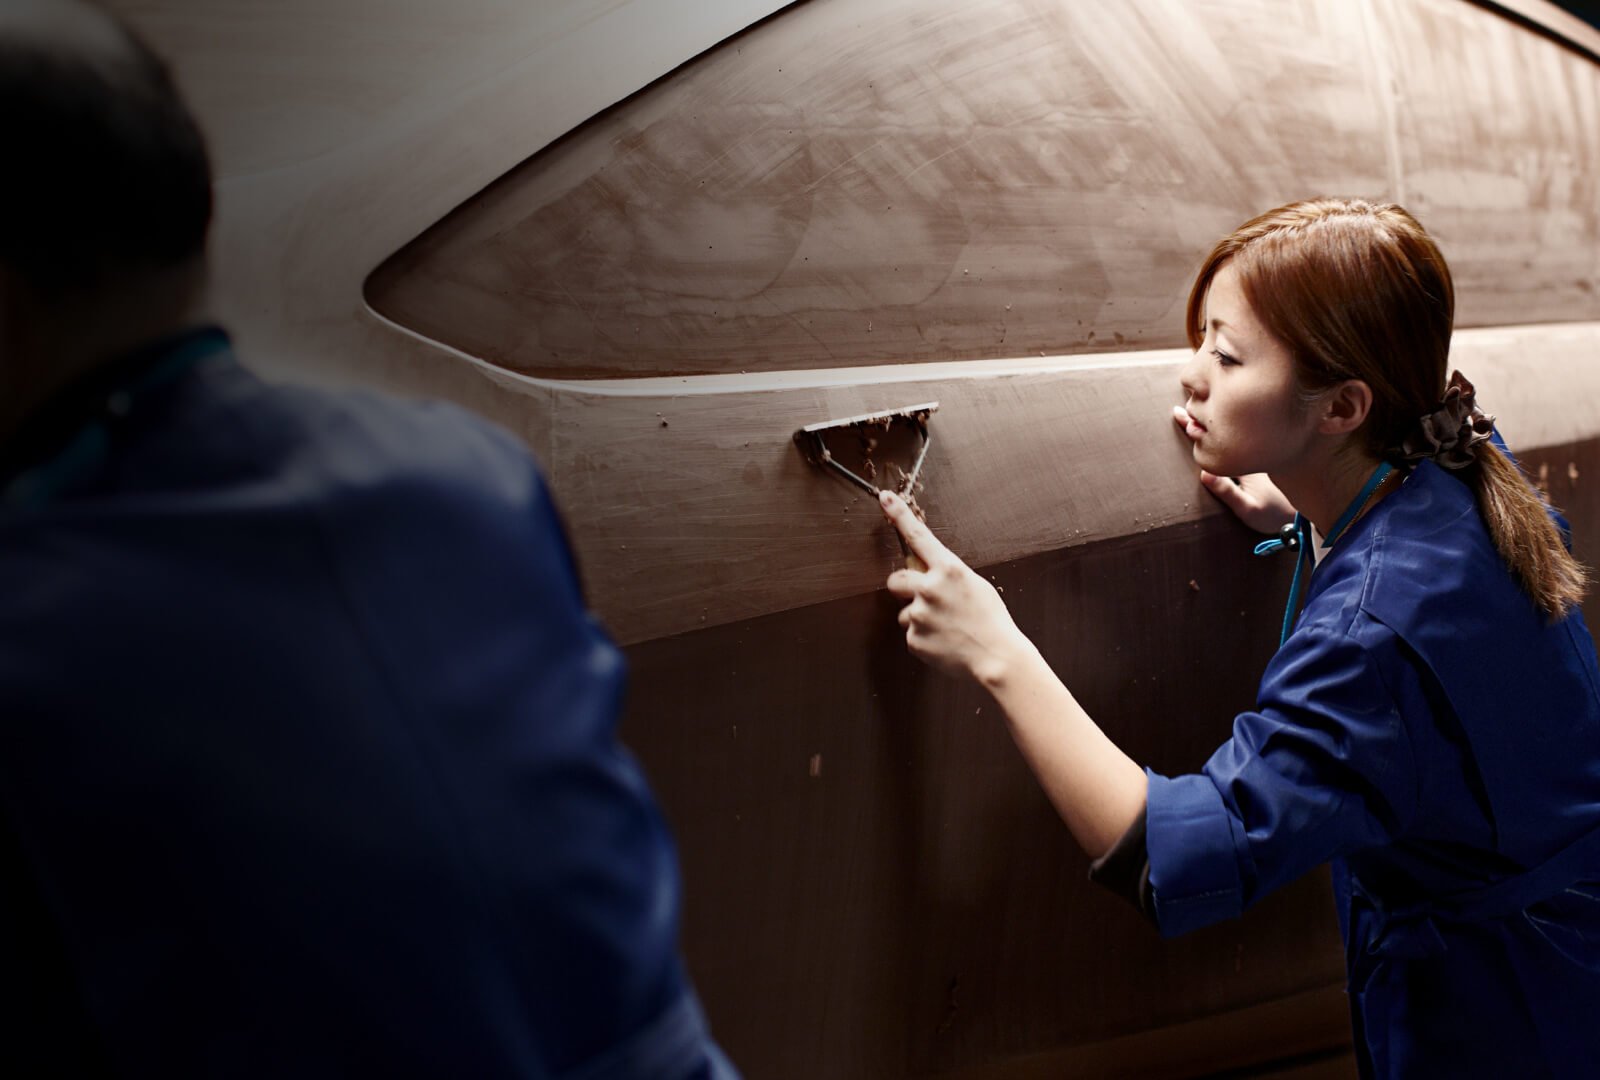 A female Takumi uses scraping tool to shape a clay Mazda form